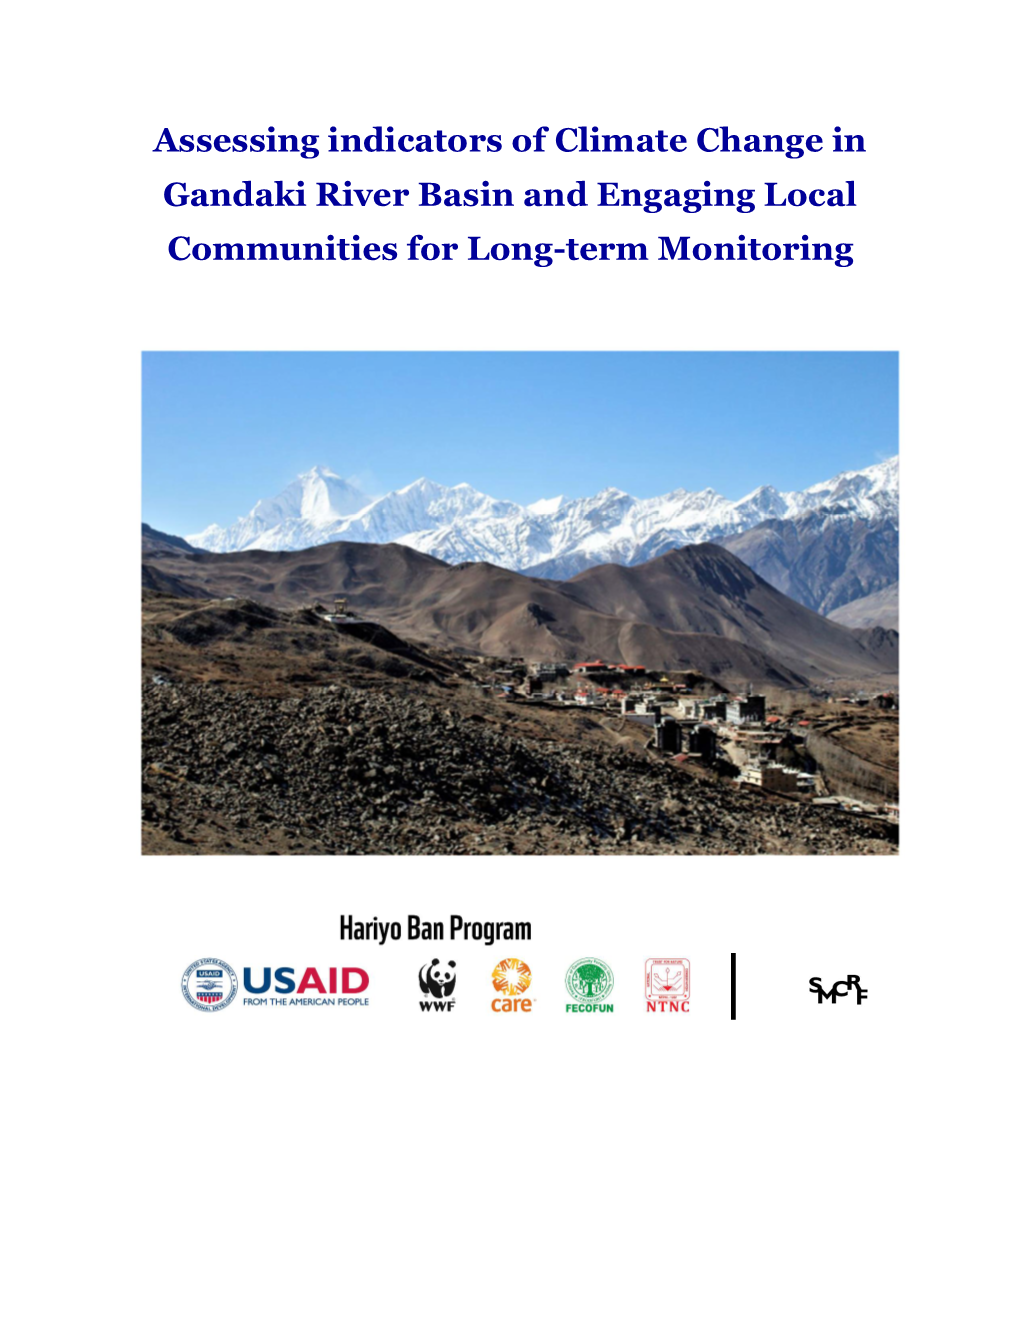 Assessing Indicators of Climate Change in Gandaki River Basin and Engaging Local Communities for Long-Term Monitoring